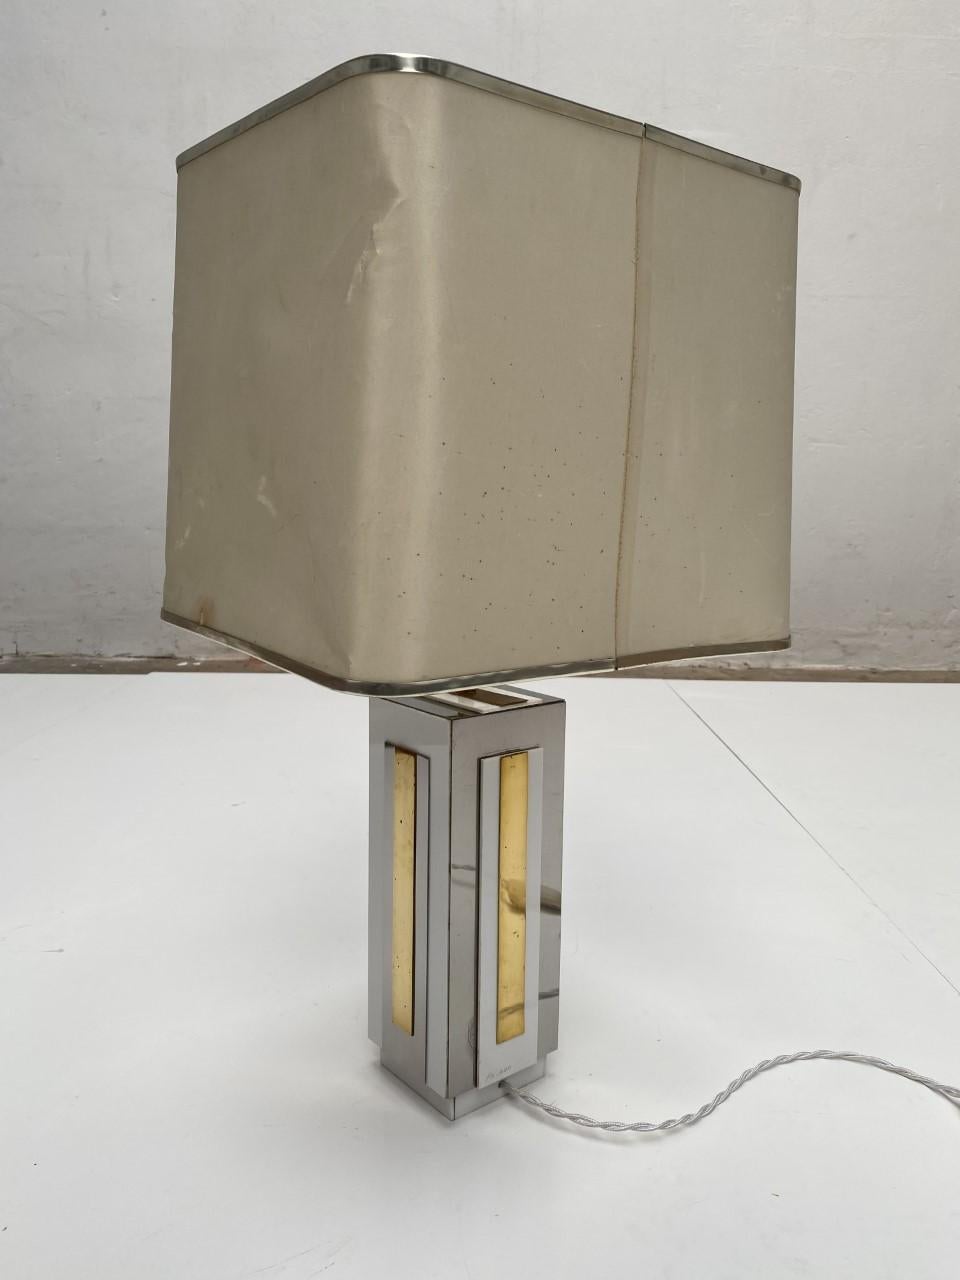 Late 20th Century Sculptural Relief Table Lamp by Sculptor 'PH Jean' 1970 Brass Inox Lucite Signed For Sale